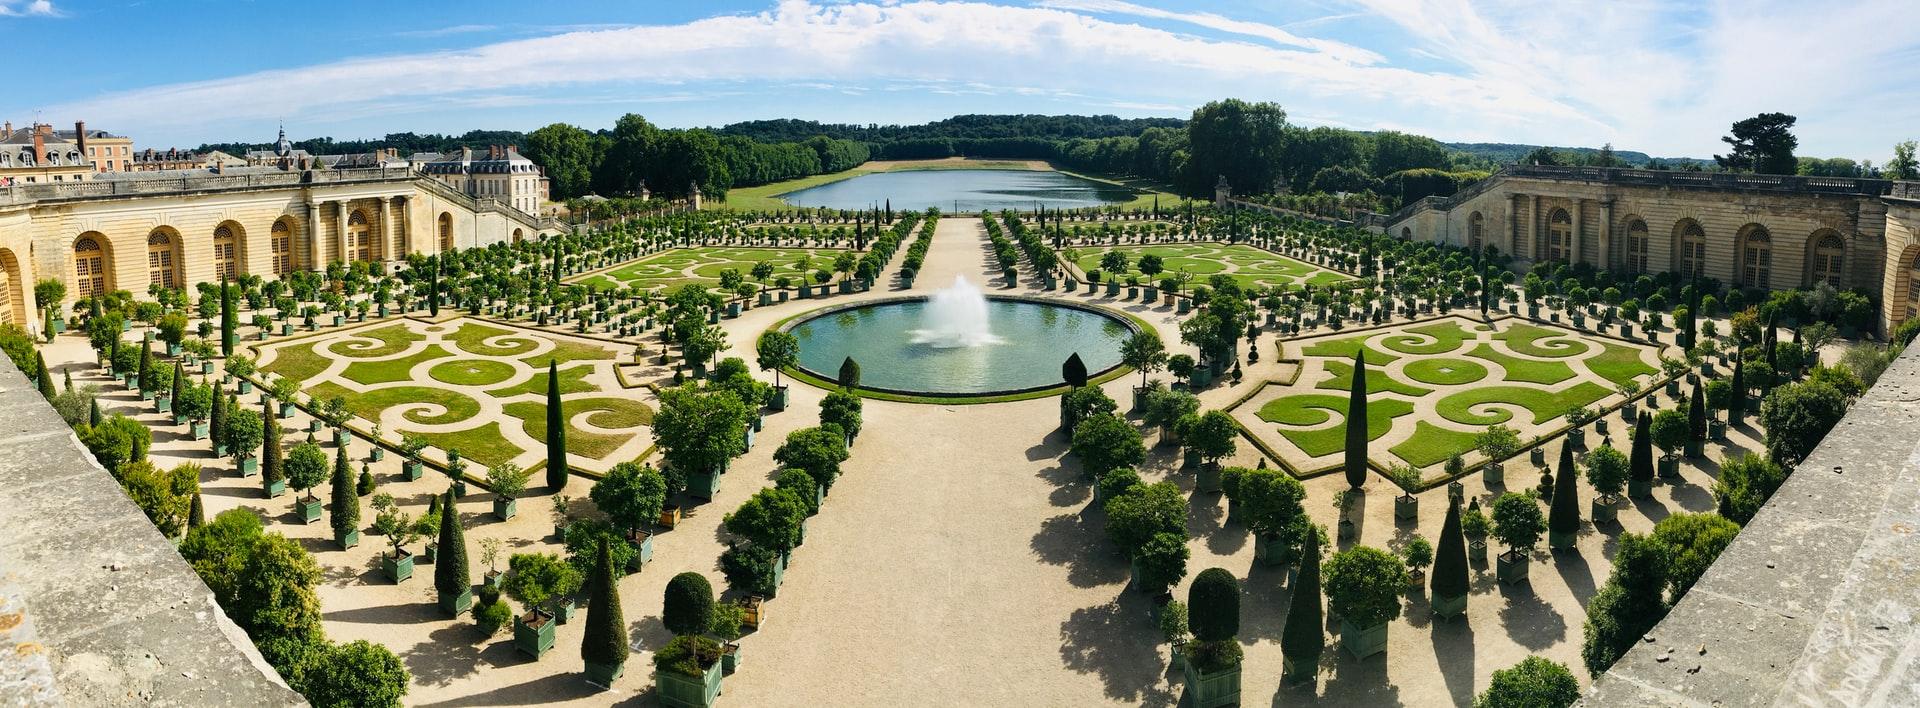 The exciting summer programme of the Palace of Versailles